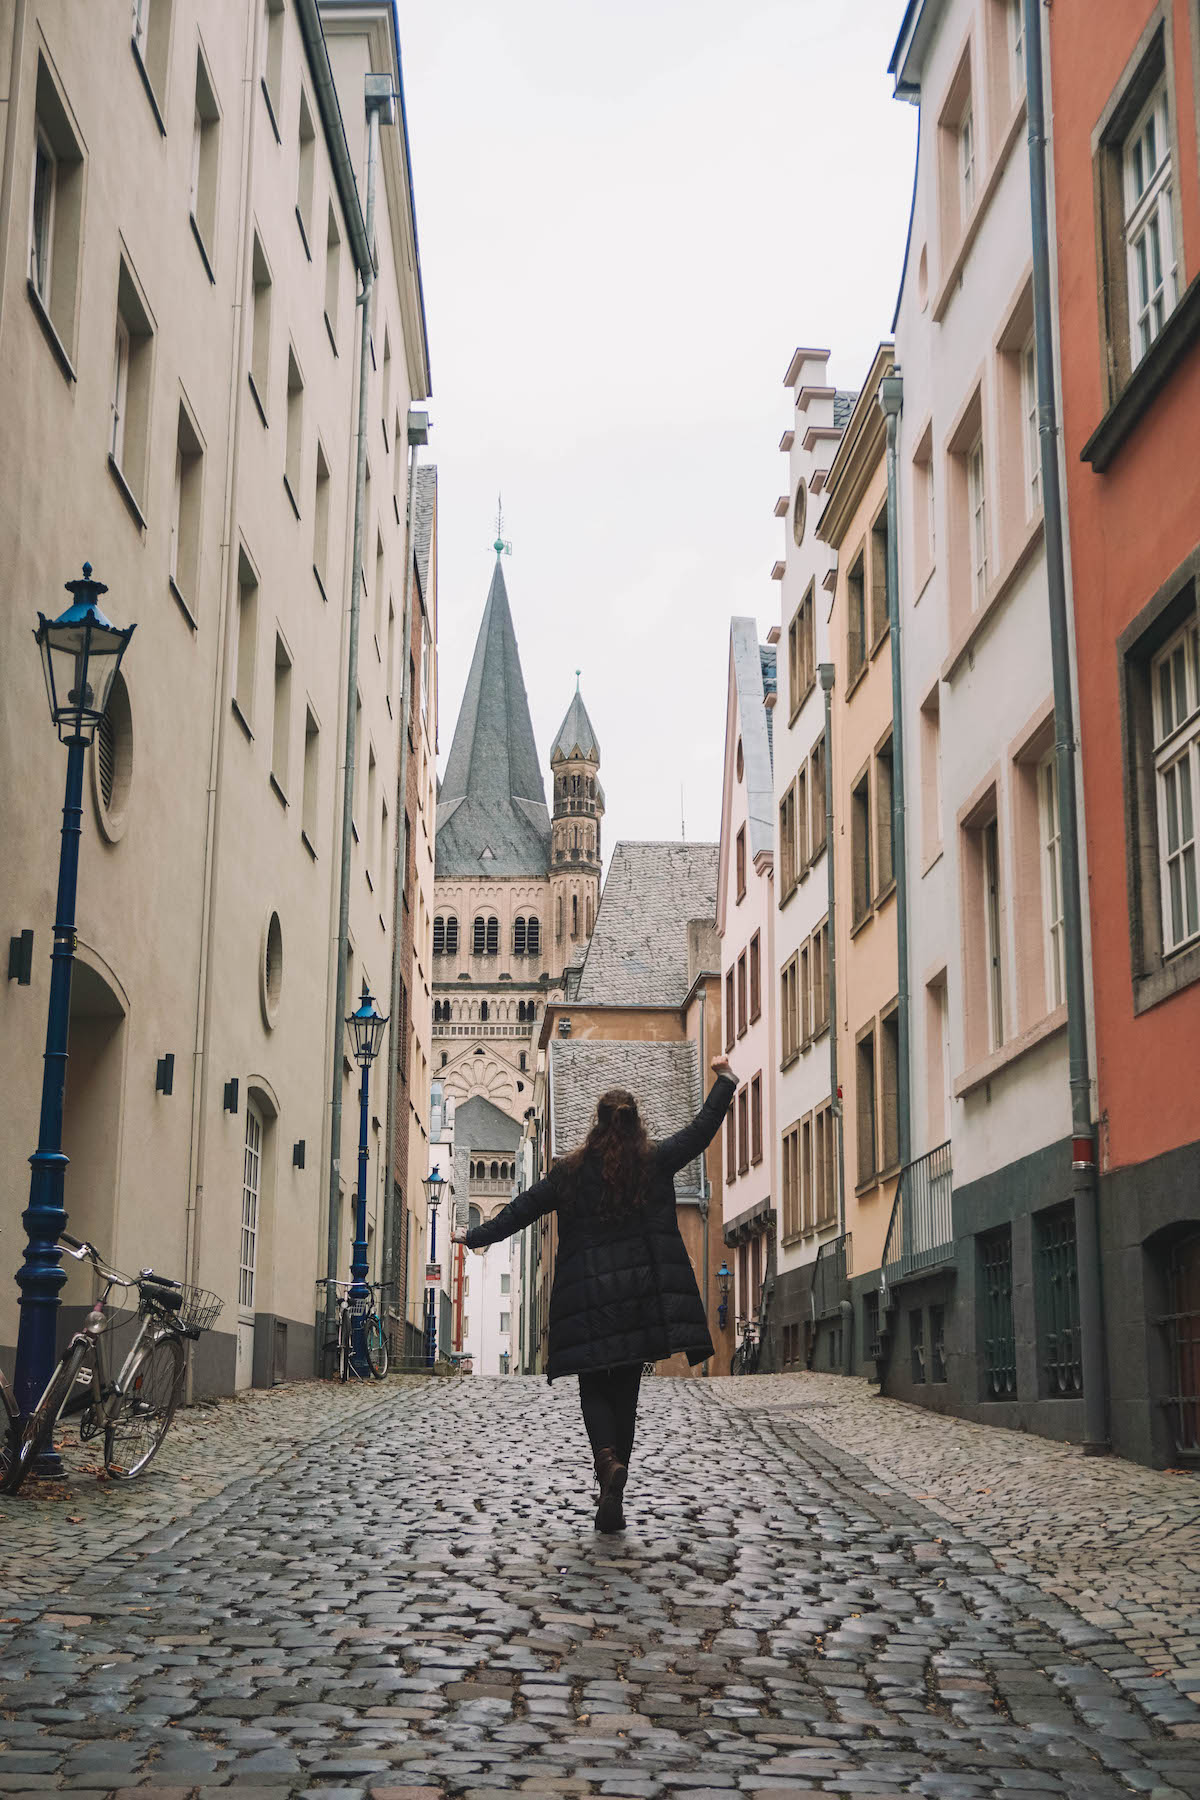 A woman holding arms aloft in a street in the Cologne Old Town